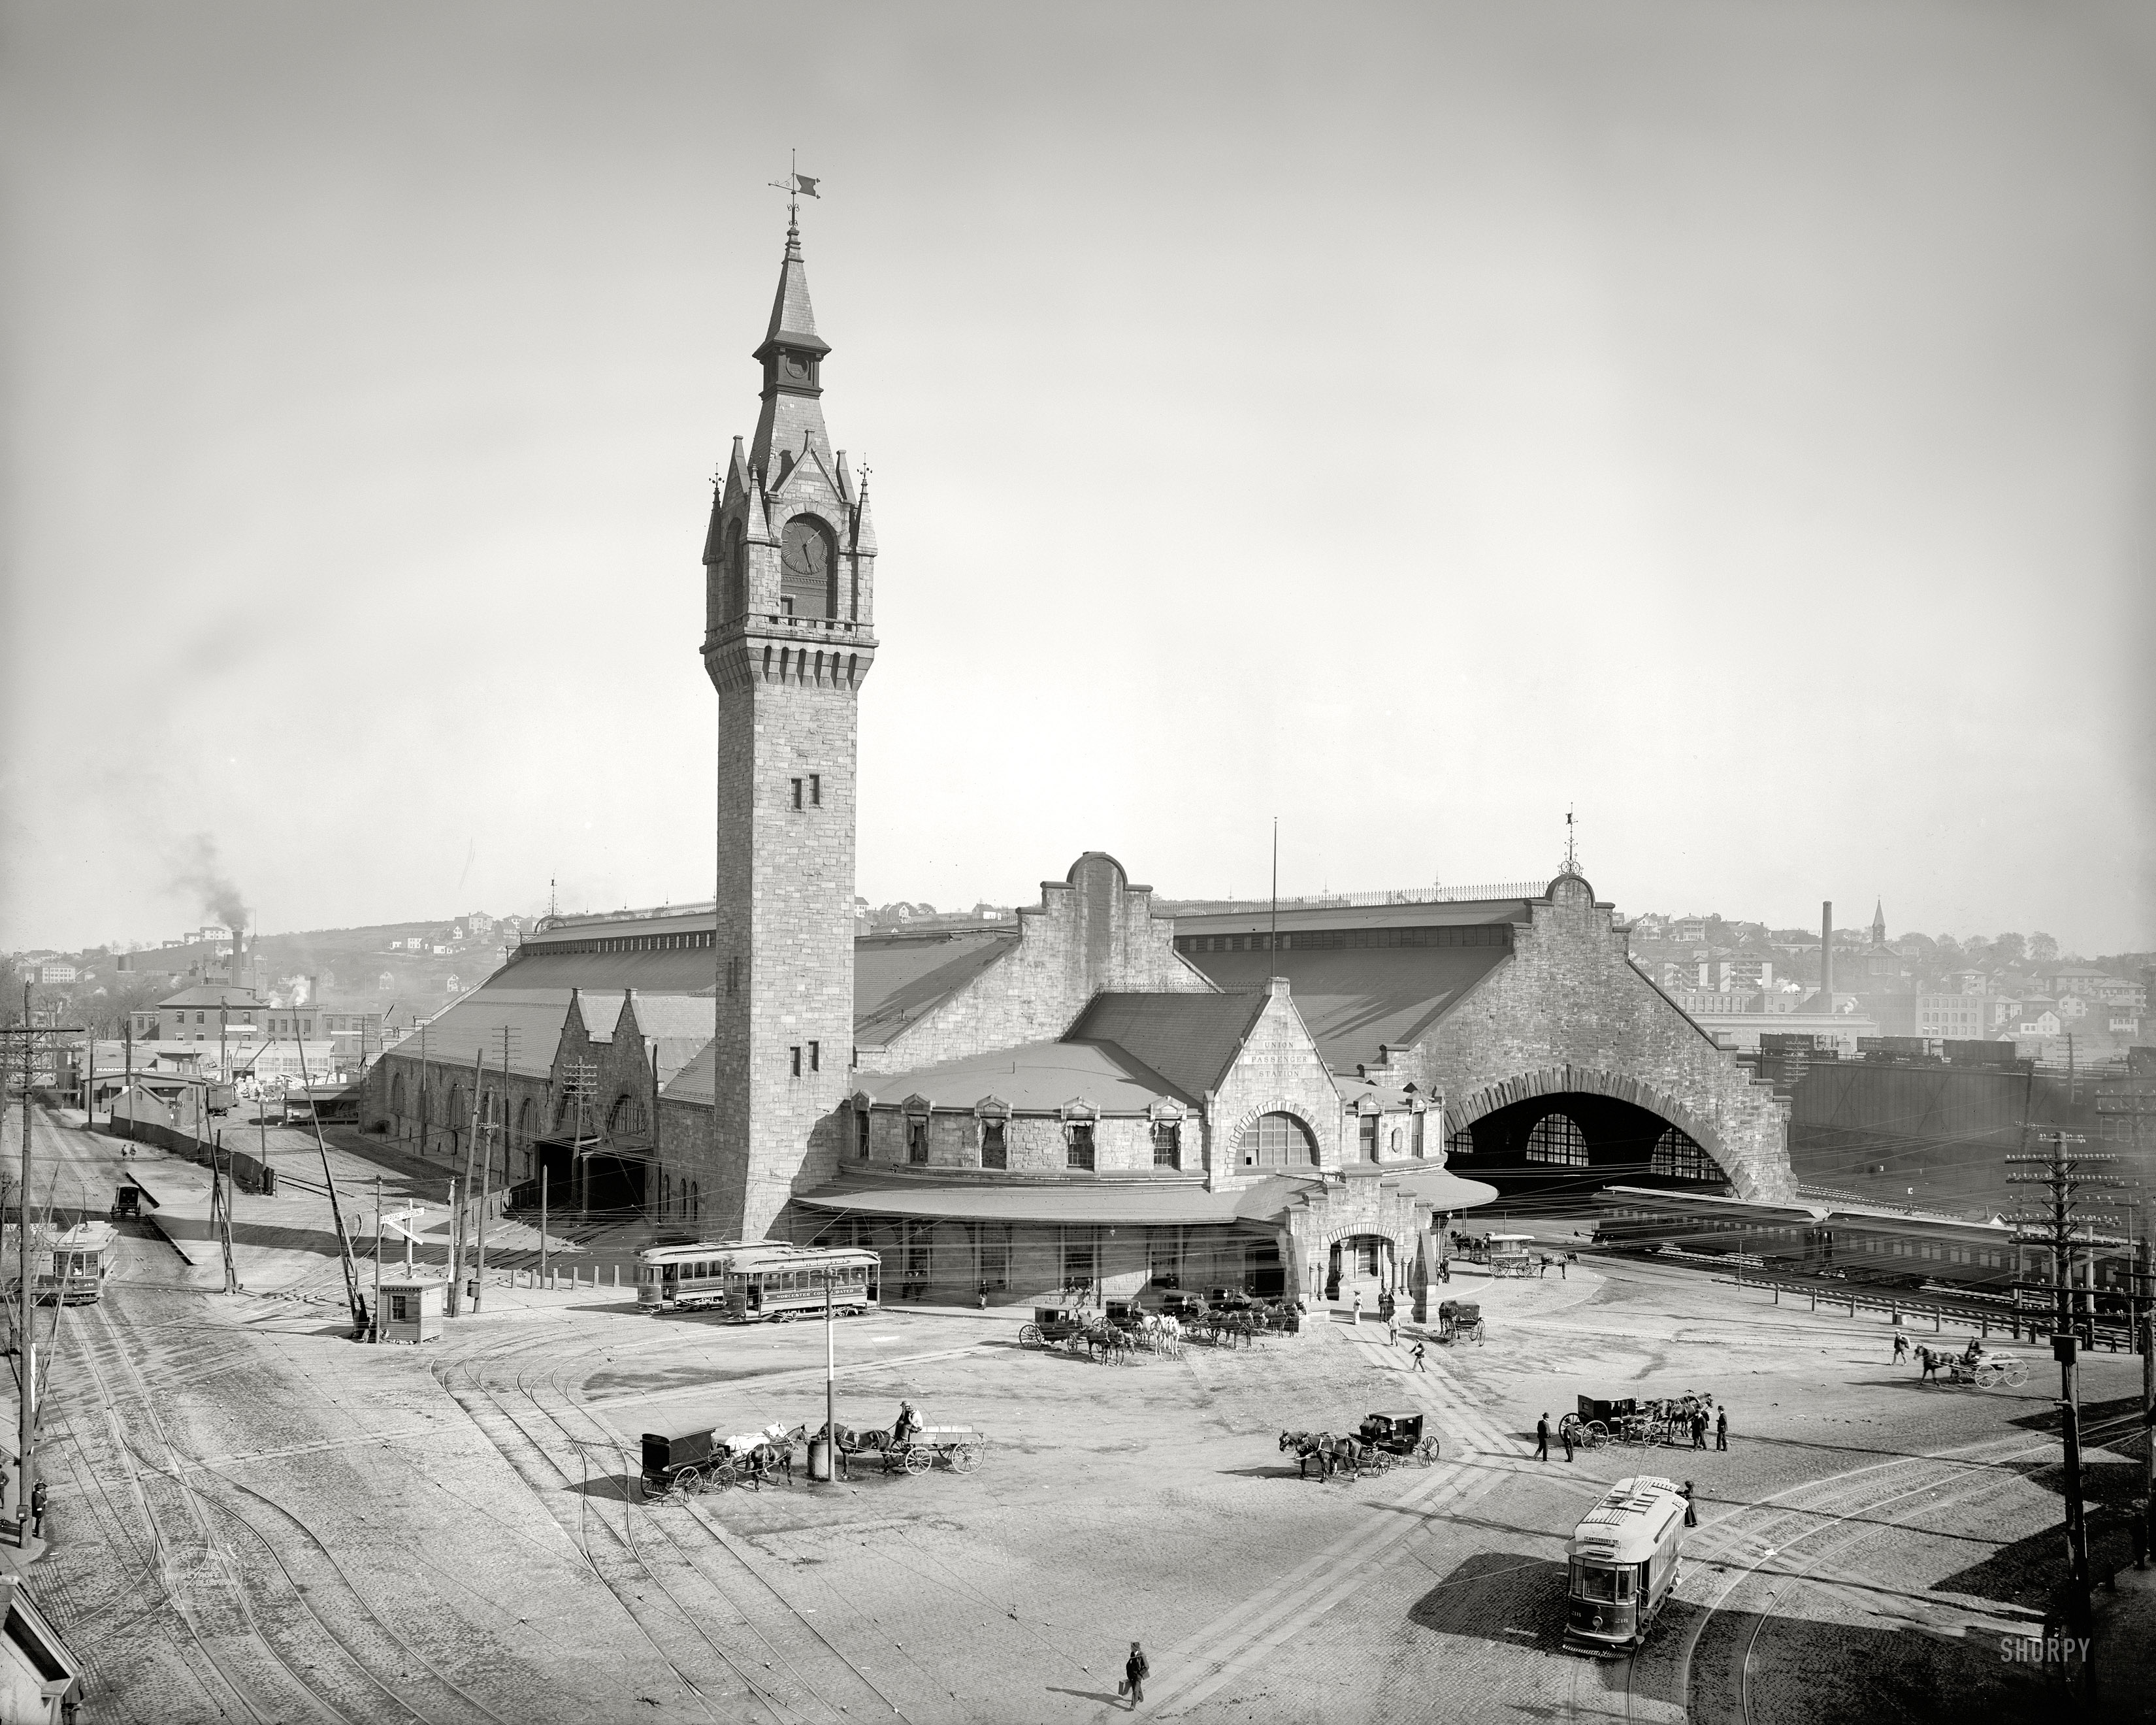 Worcester, Massachusetts, circa 1906. "Union Station." Whose clock tower illustrates the campanile vogue in public architecture at its vertiginous peak. 8x10 inch dry plate glass negative, Detroit Publishing Company. View full size.